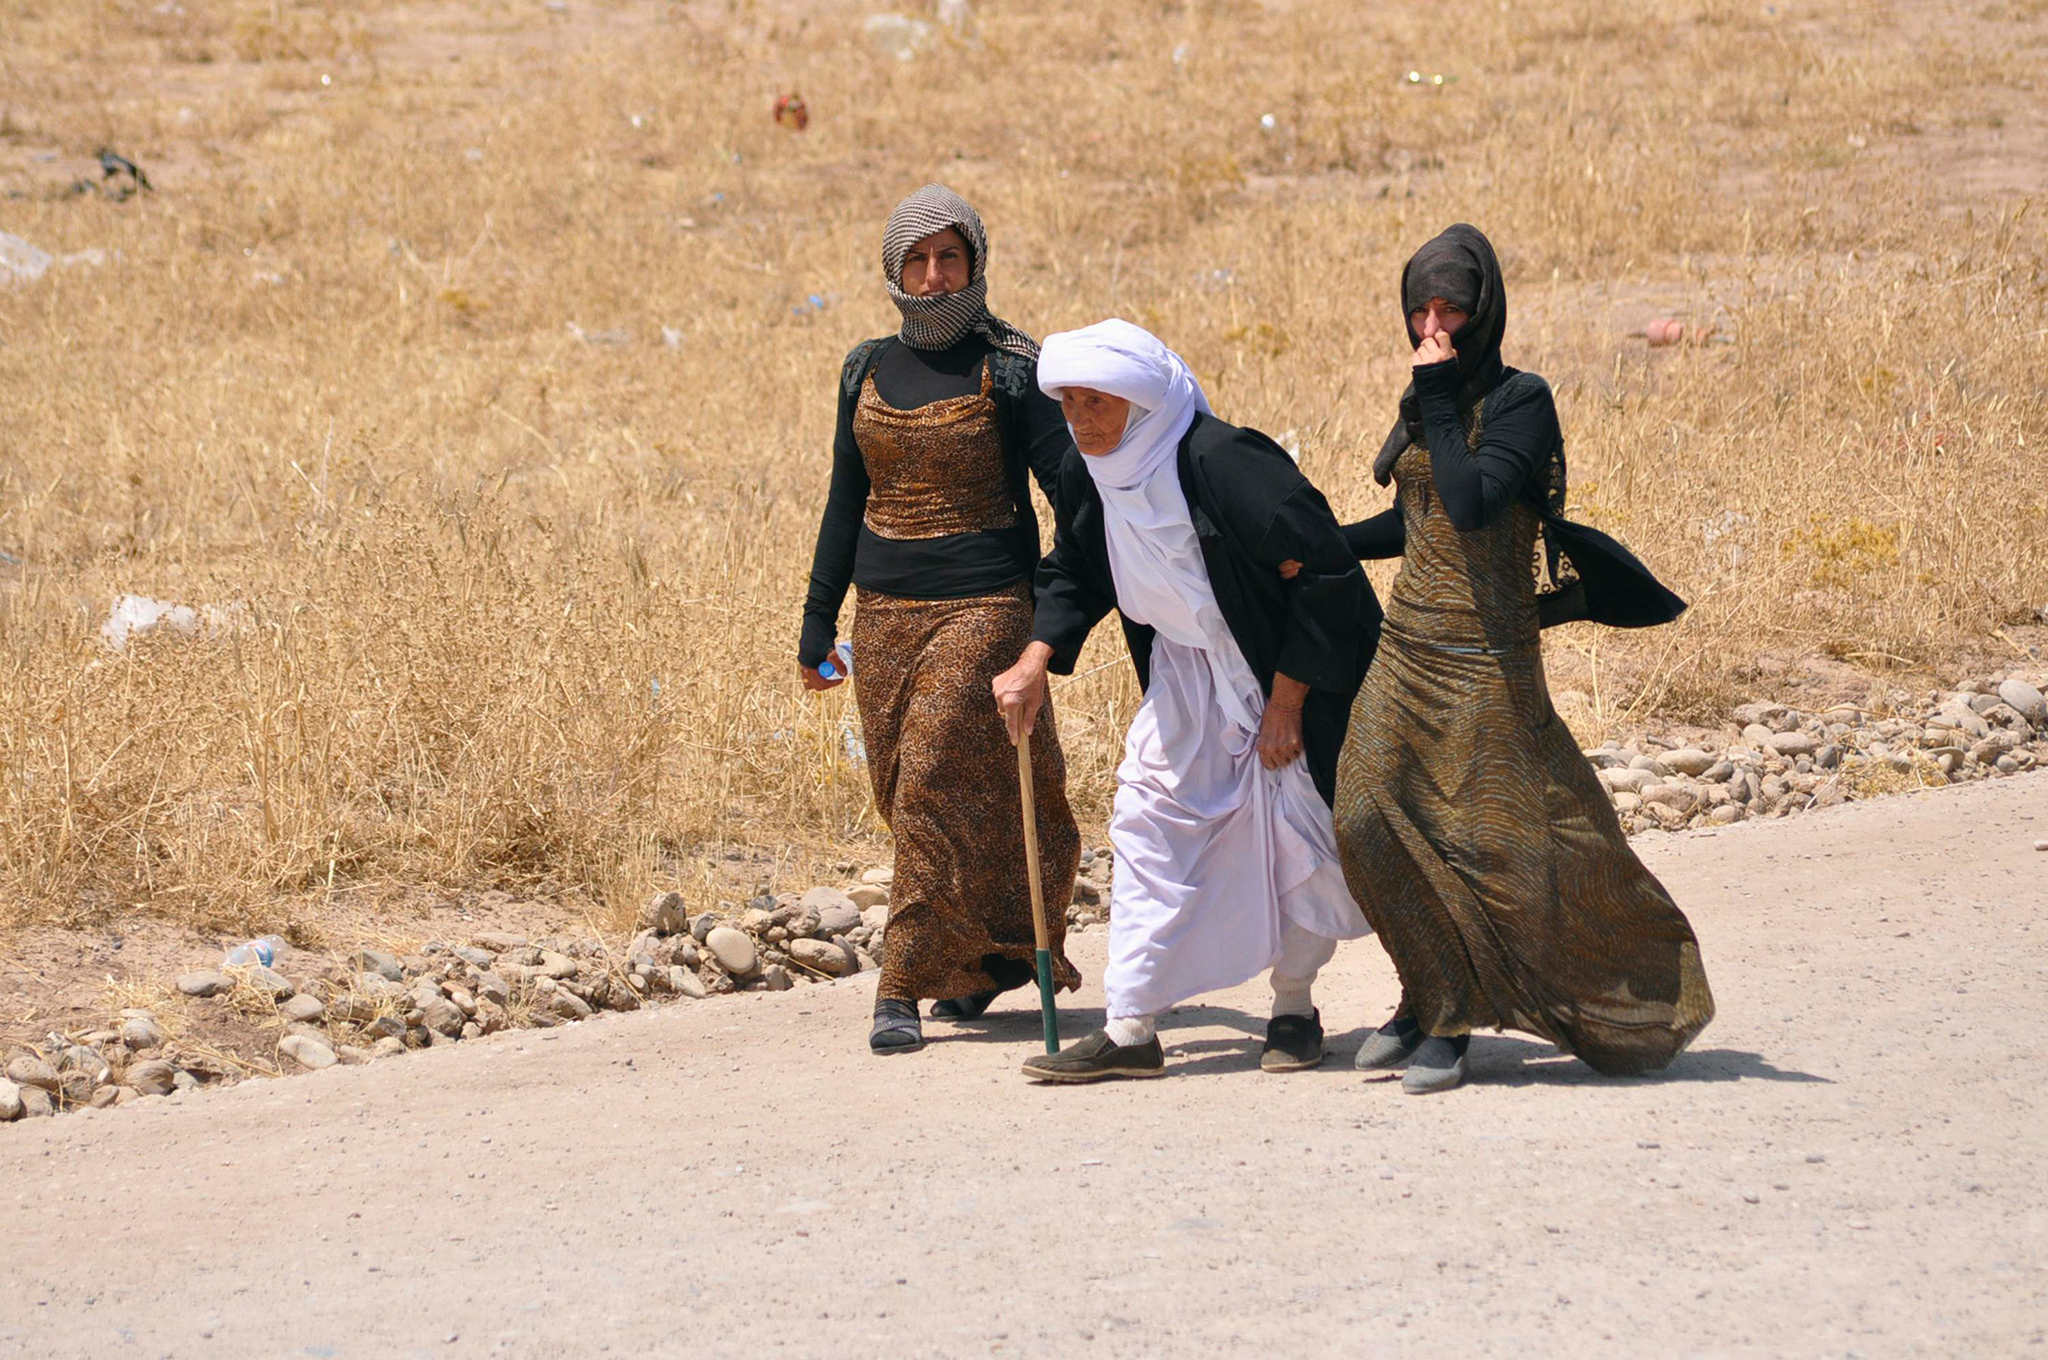 Displaced families from the minority Yazidi sect, fleeing the violence, walk on the outskirts of Sinjar, west of Mosul.